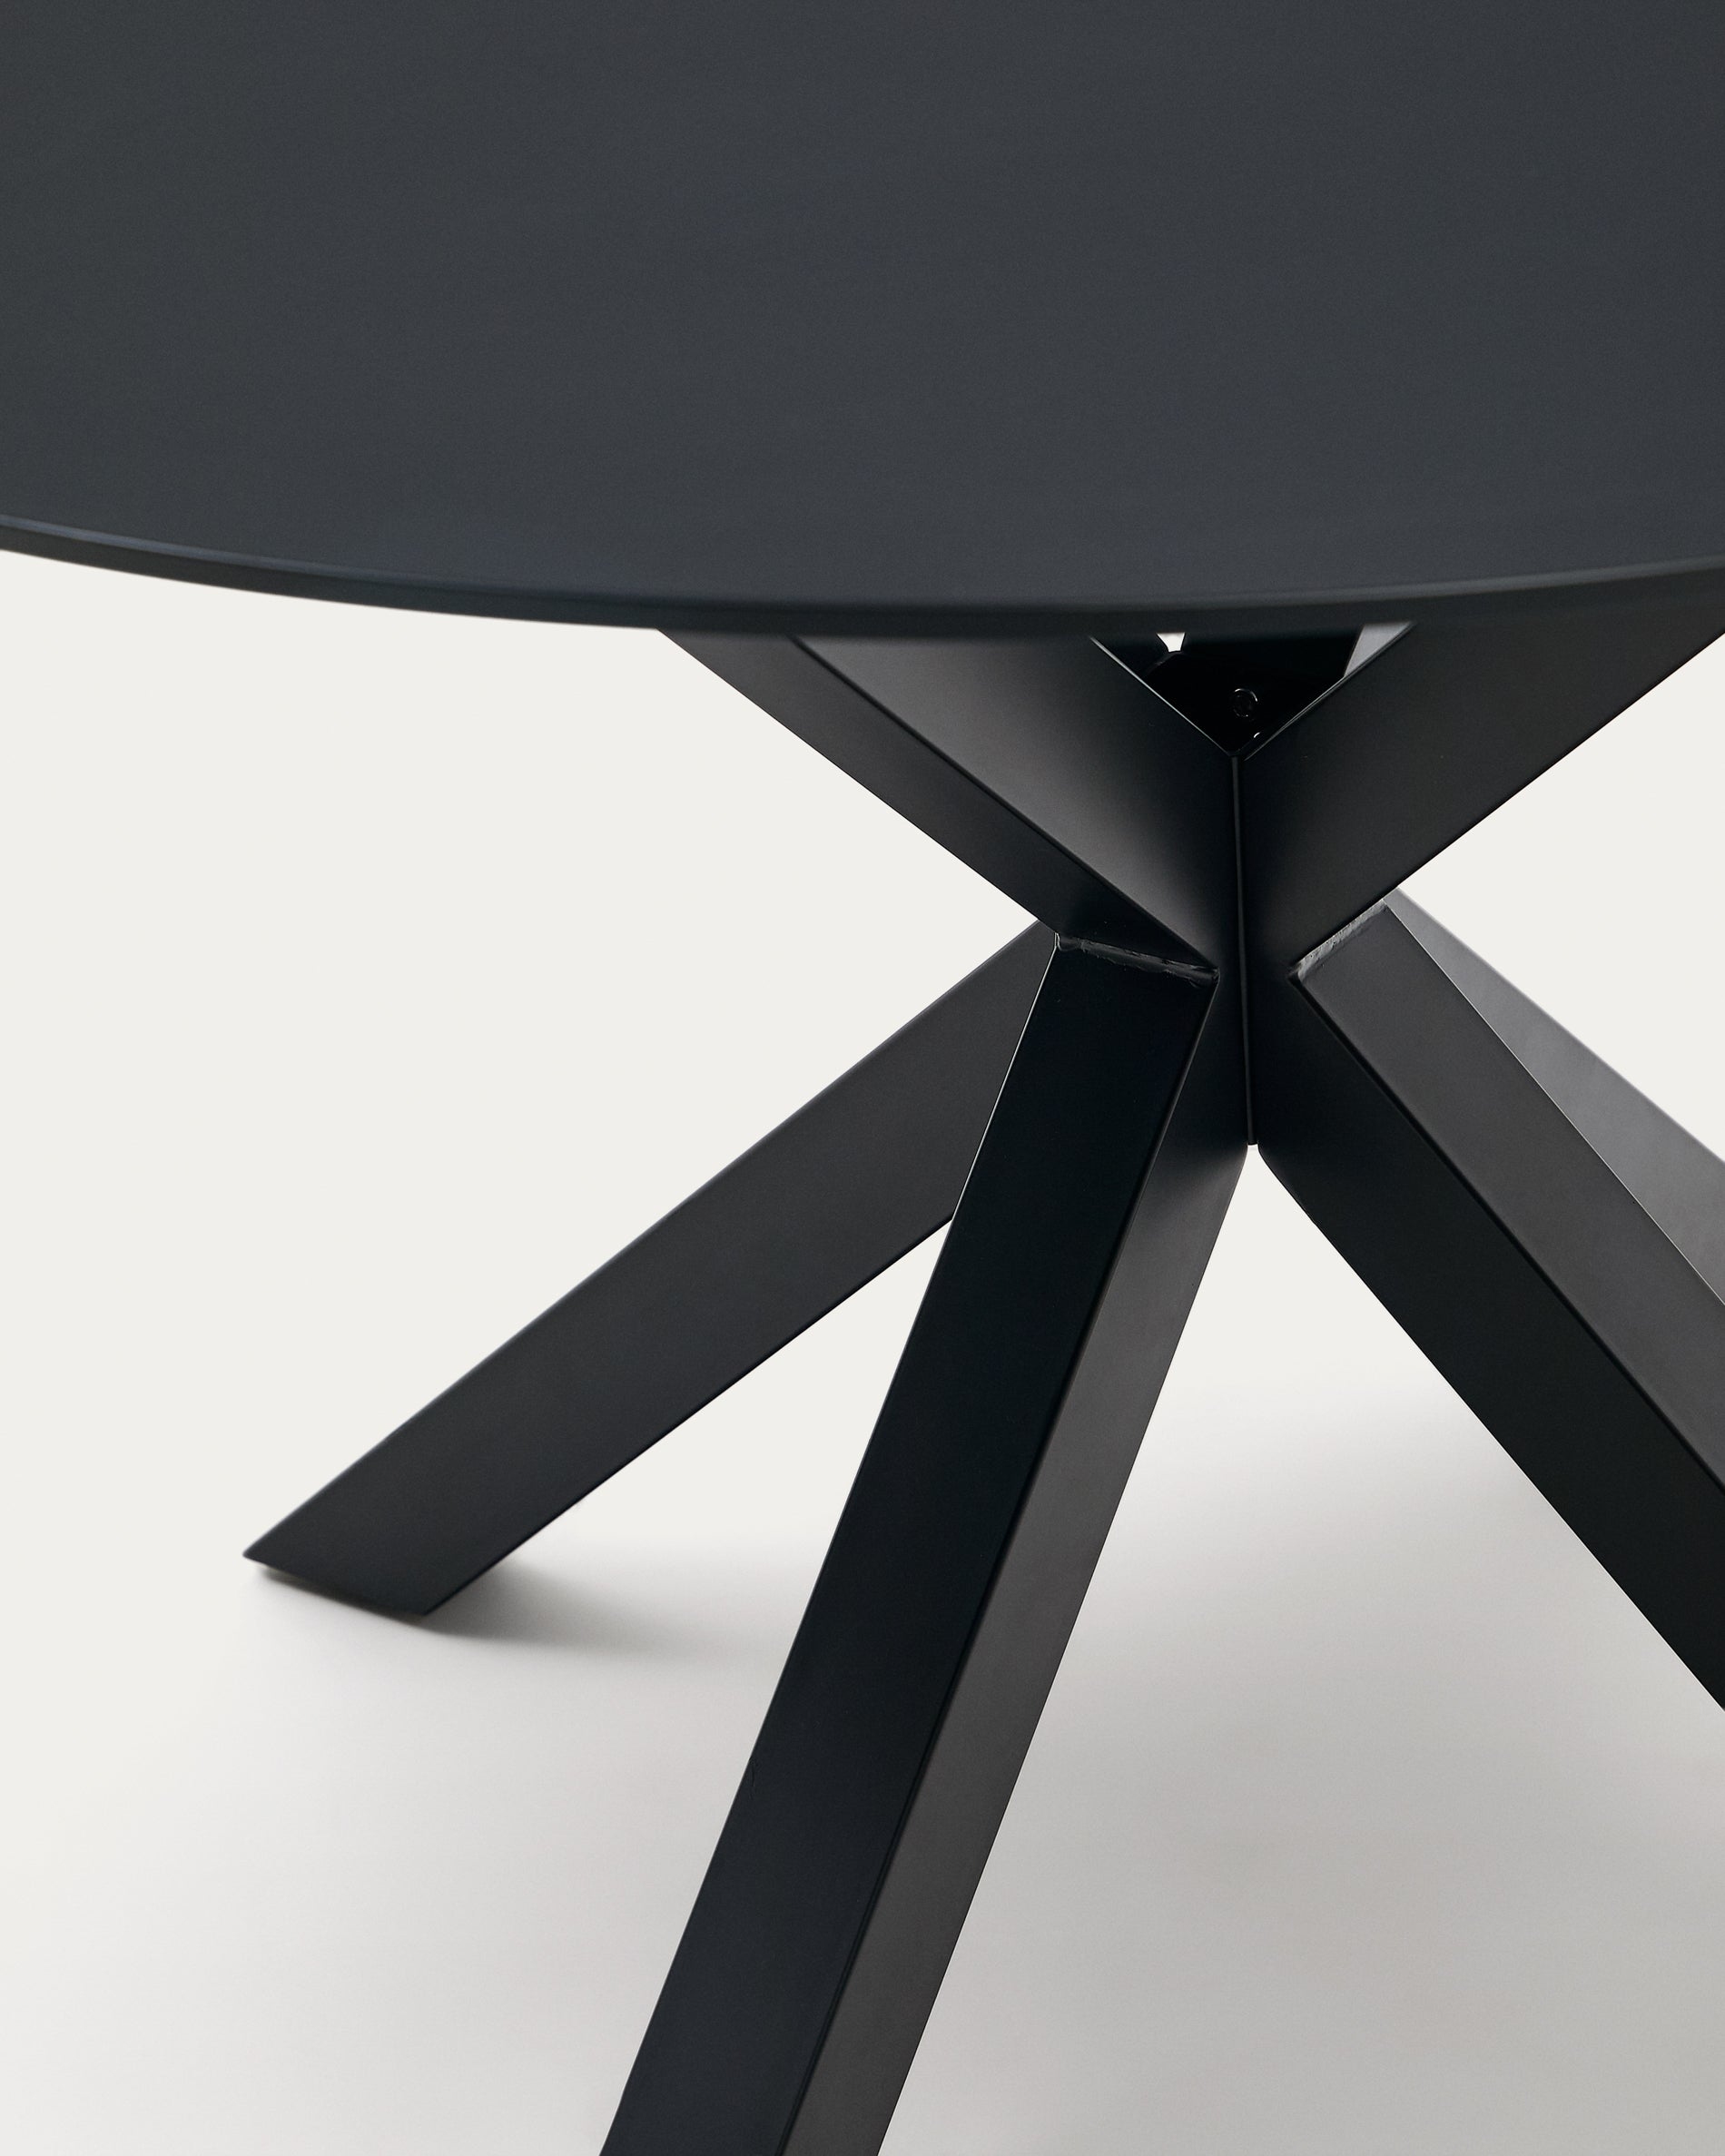 Argo round table with black glass and black steel legs Ø 150 cm